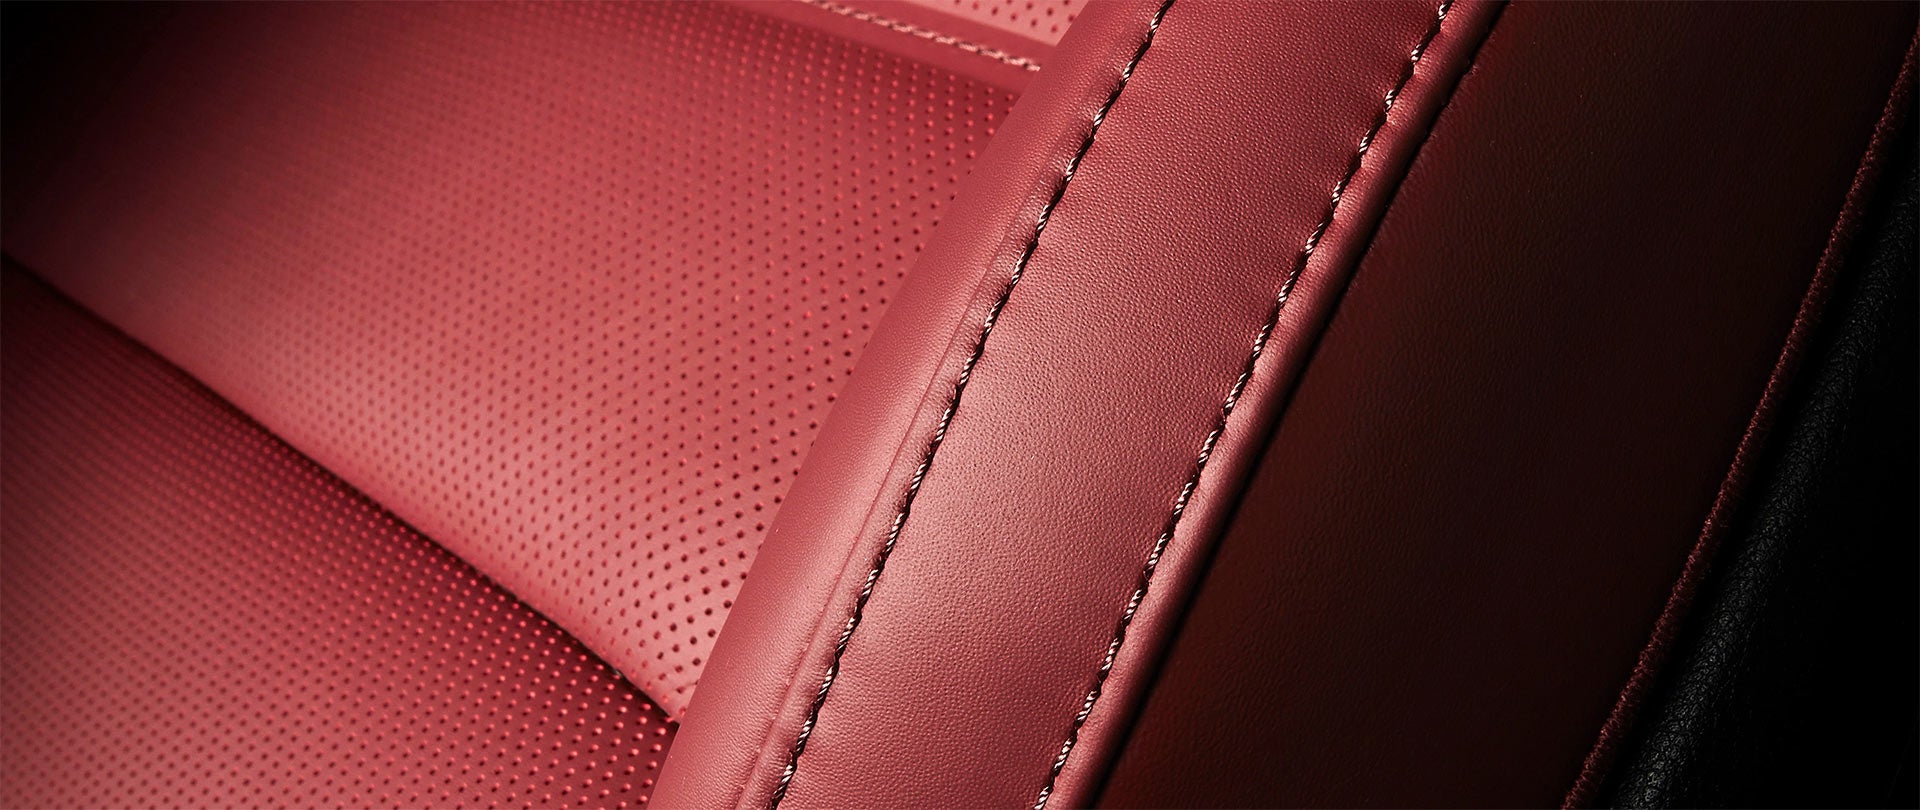 red leather seats